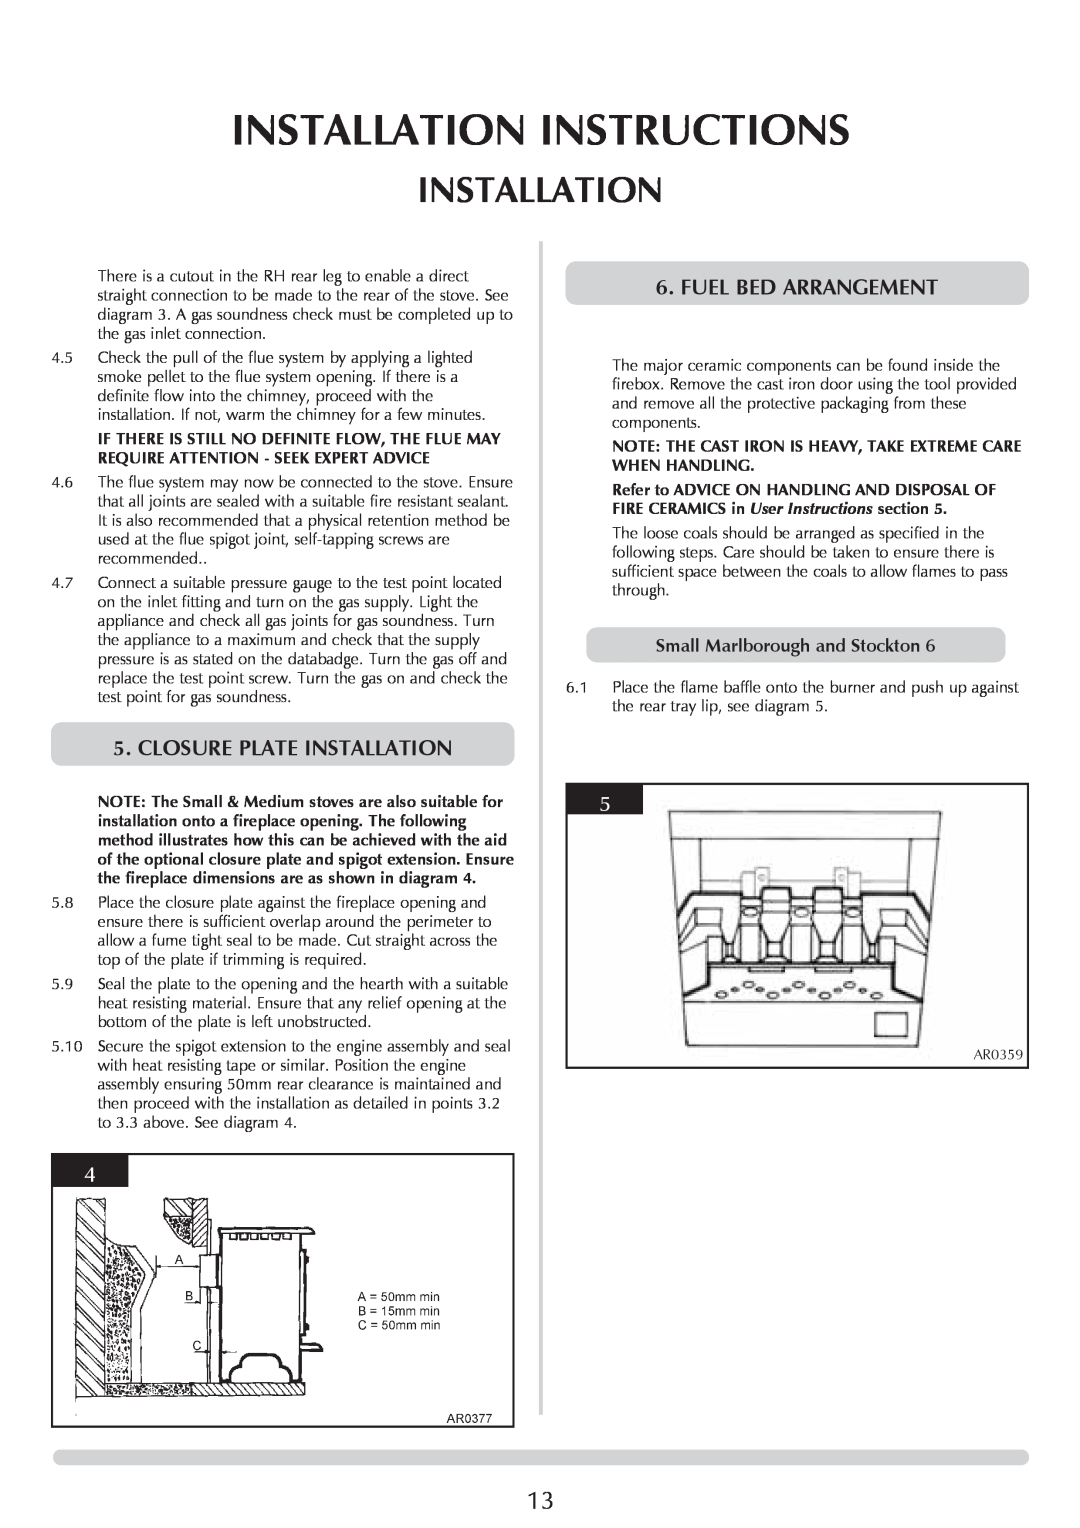 Stovax Coal Effect Stove Range manual Installation Instructions, Closure Plate Installation, Fuel Bed Arrangement 